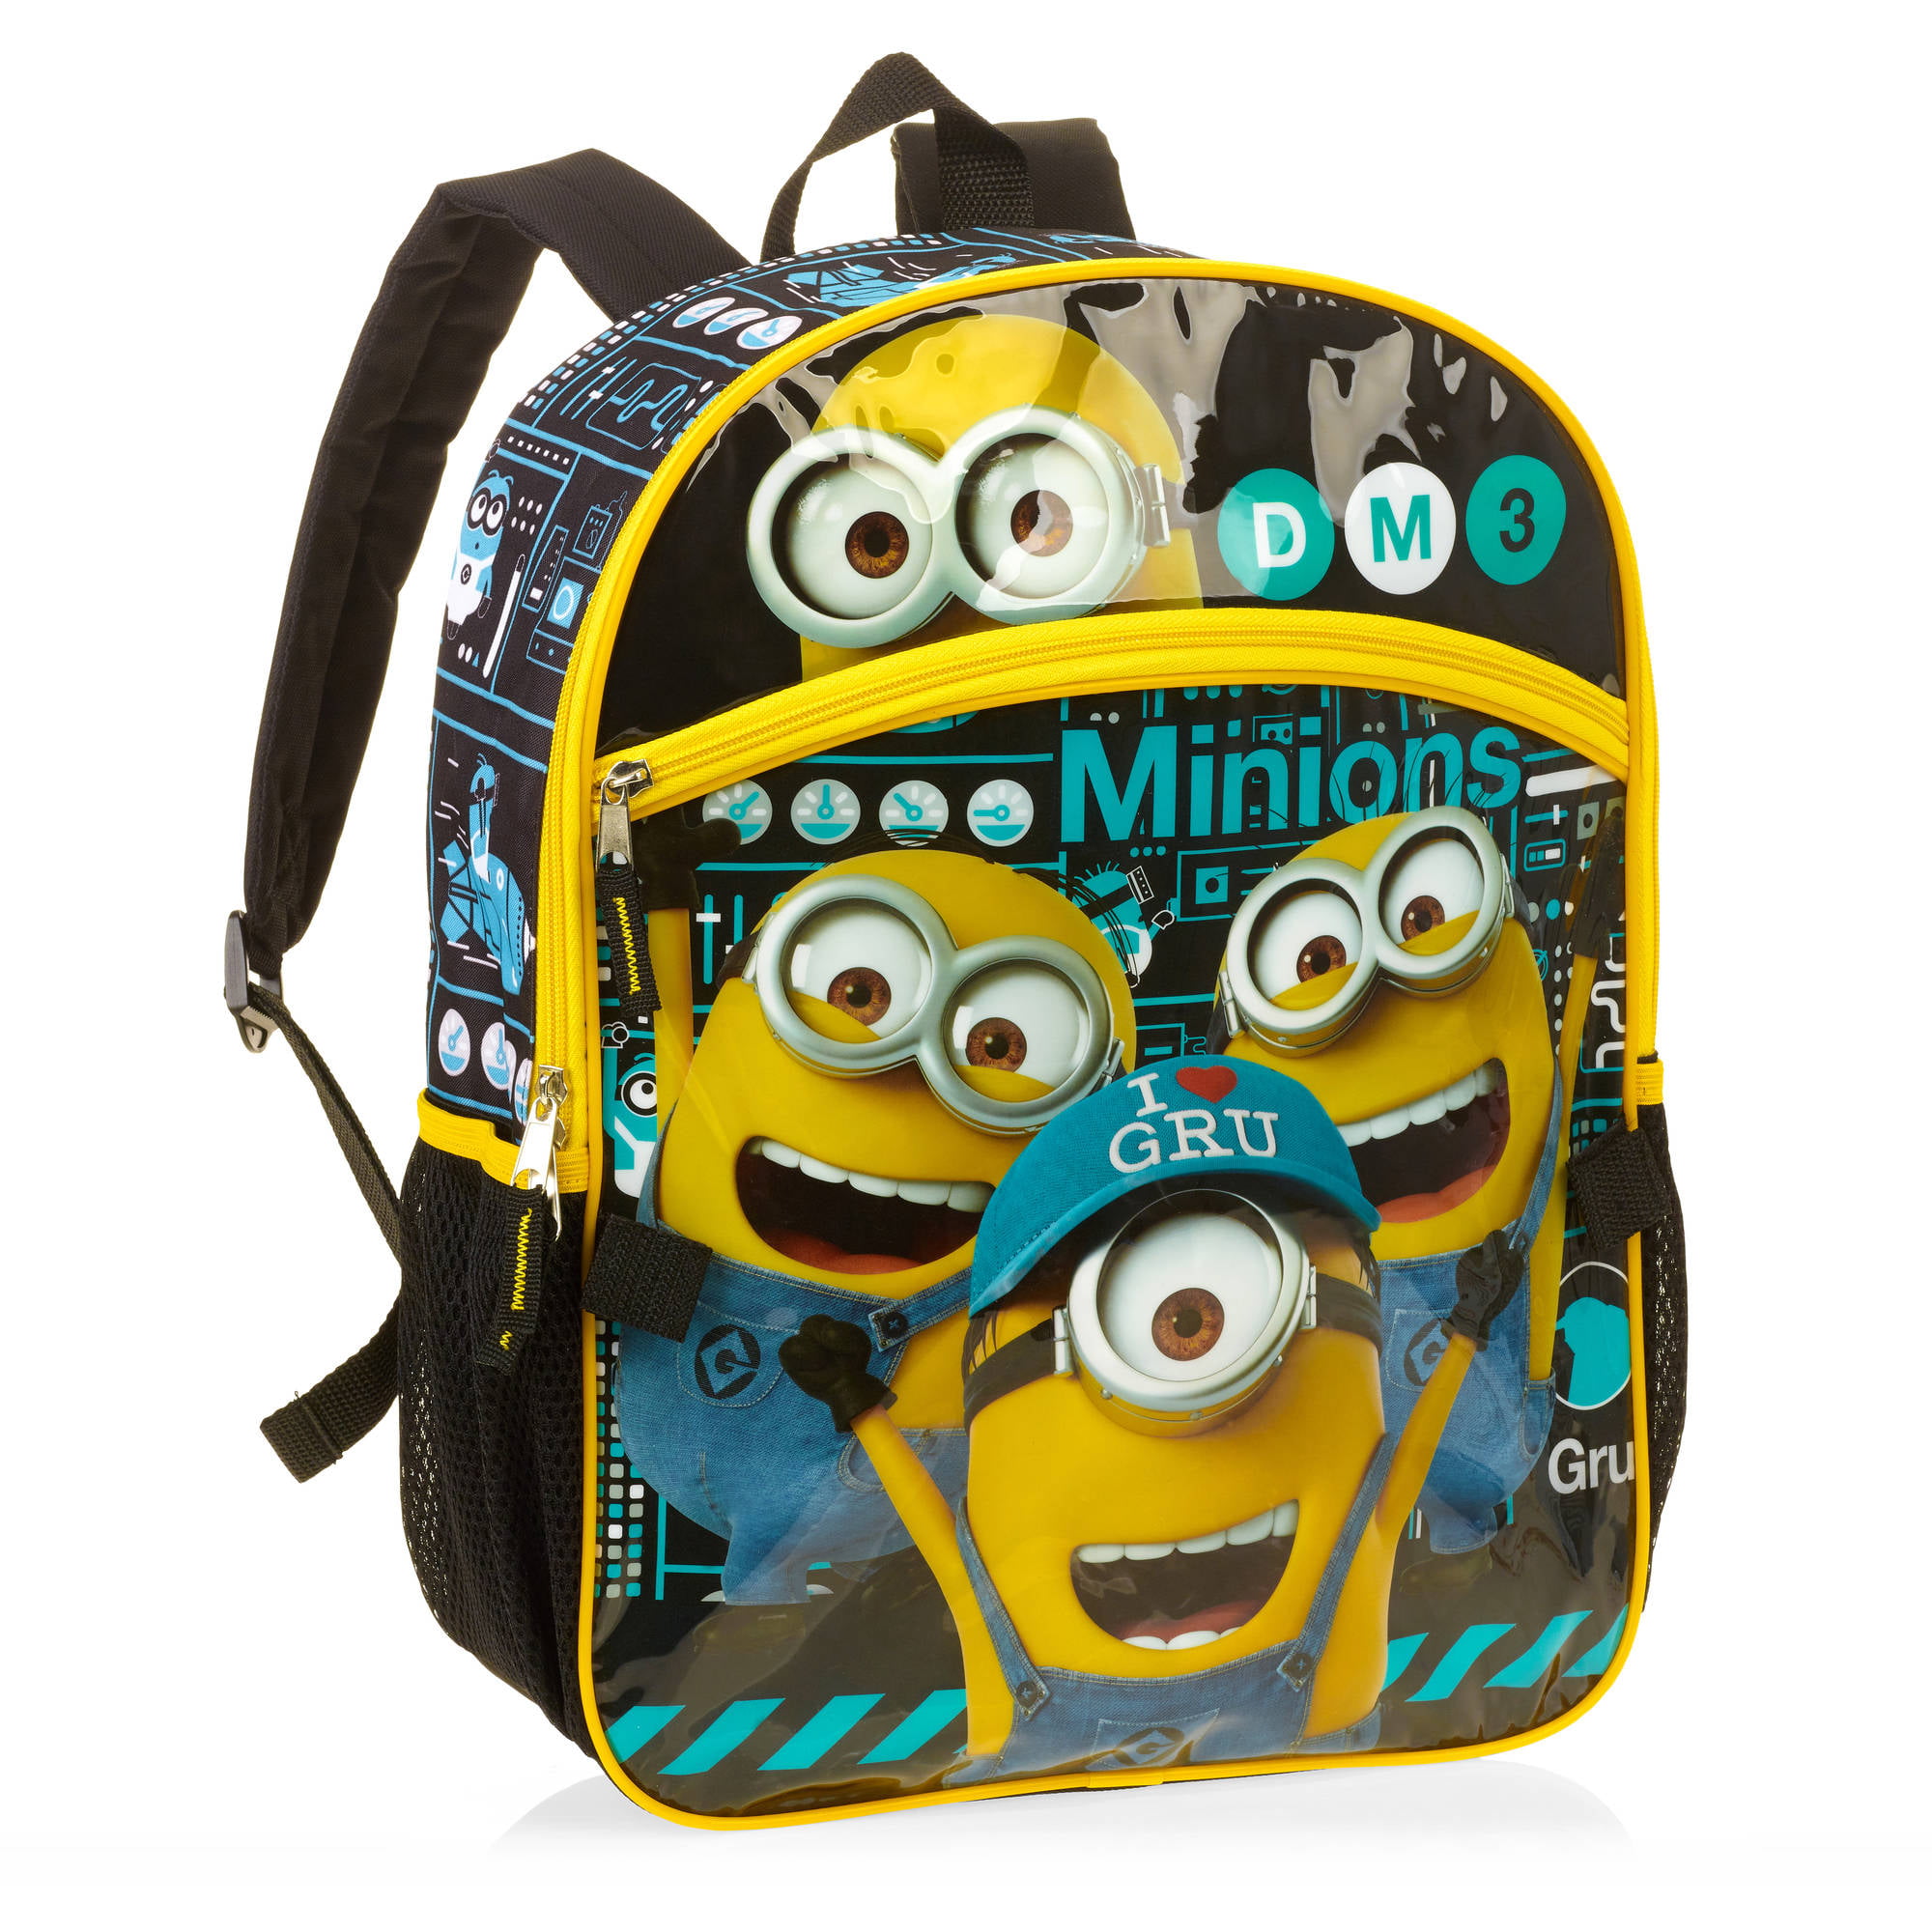 Despicable Me Minions School Travel Backpack And Lunch Box For Kids 2-Piece  Set Multicoloured